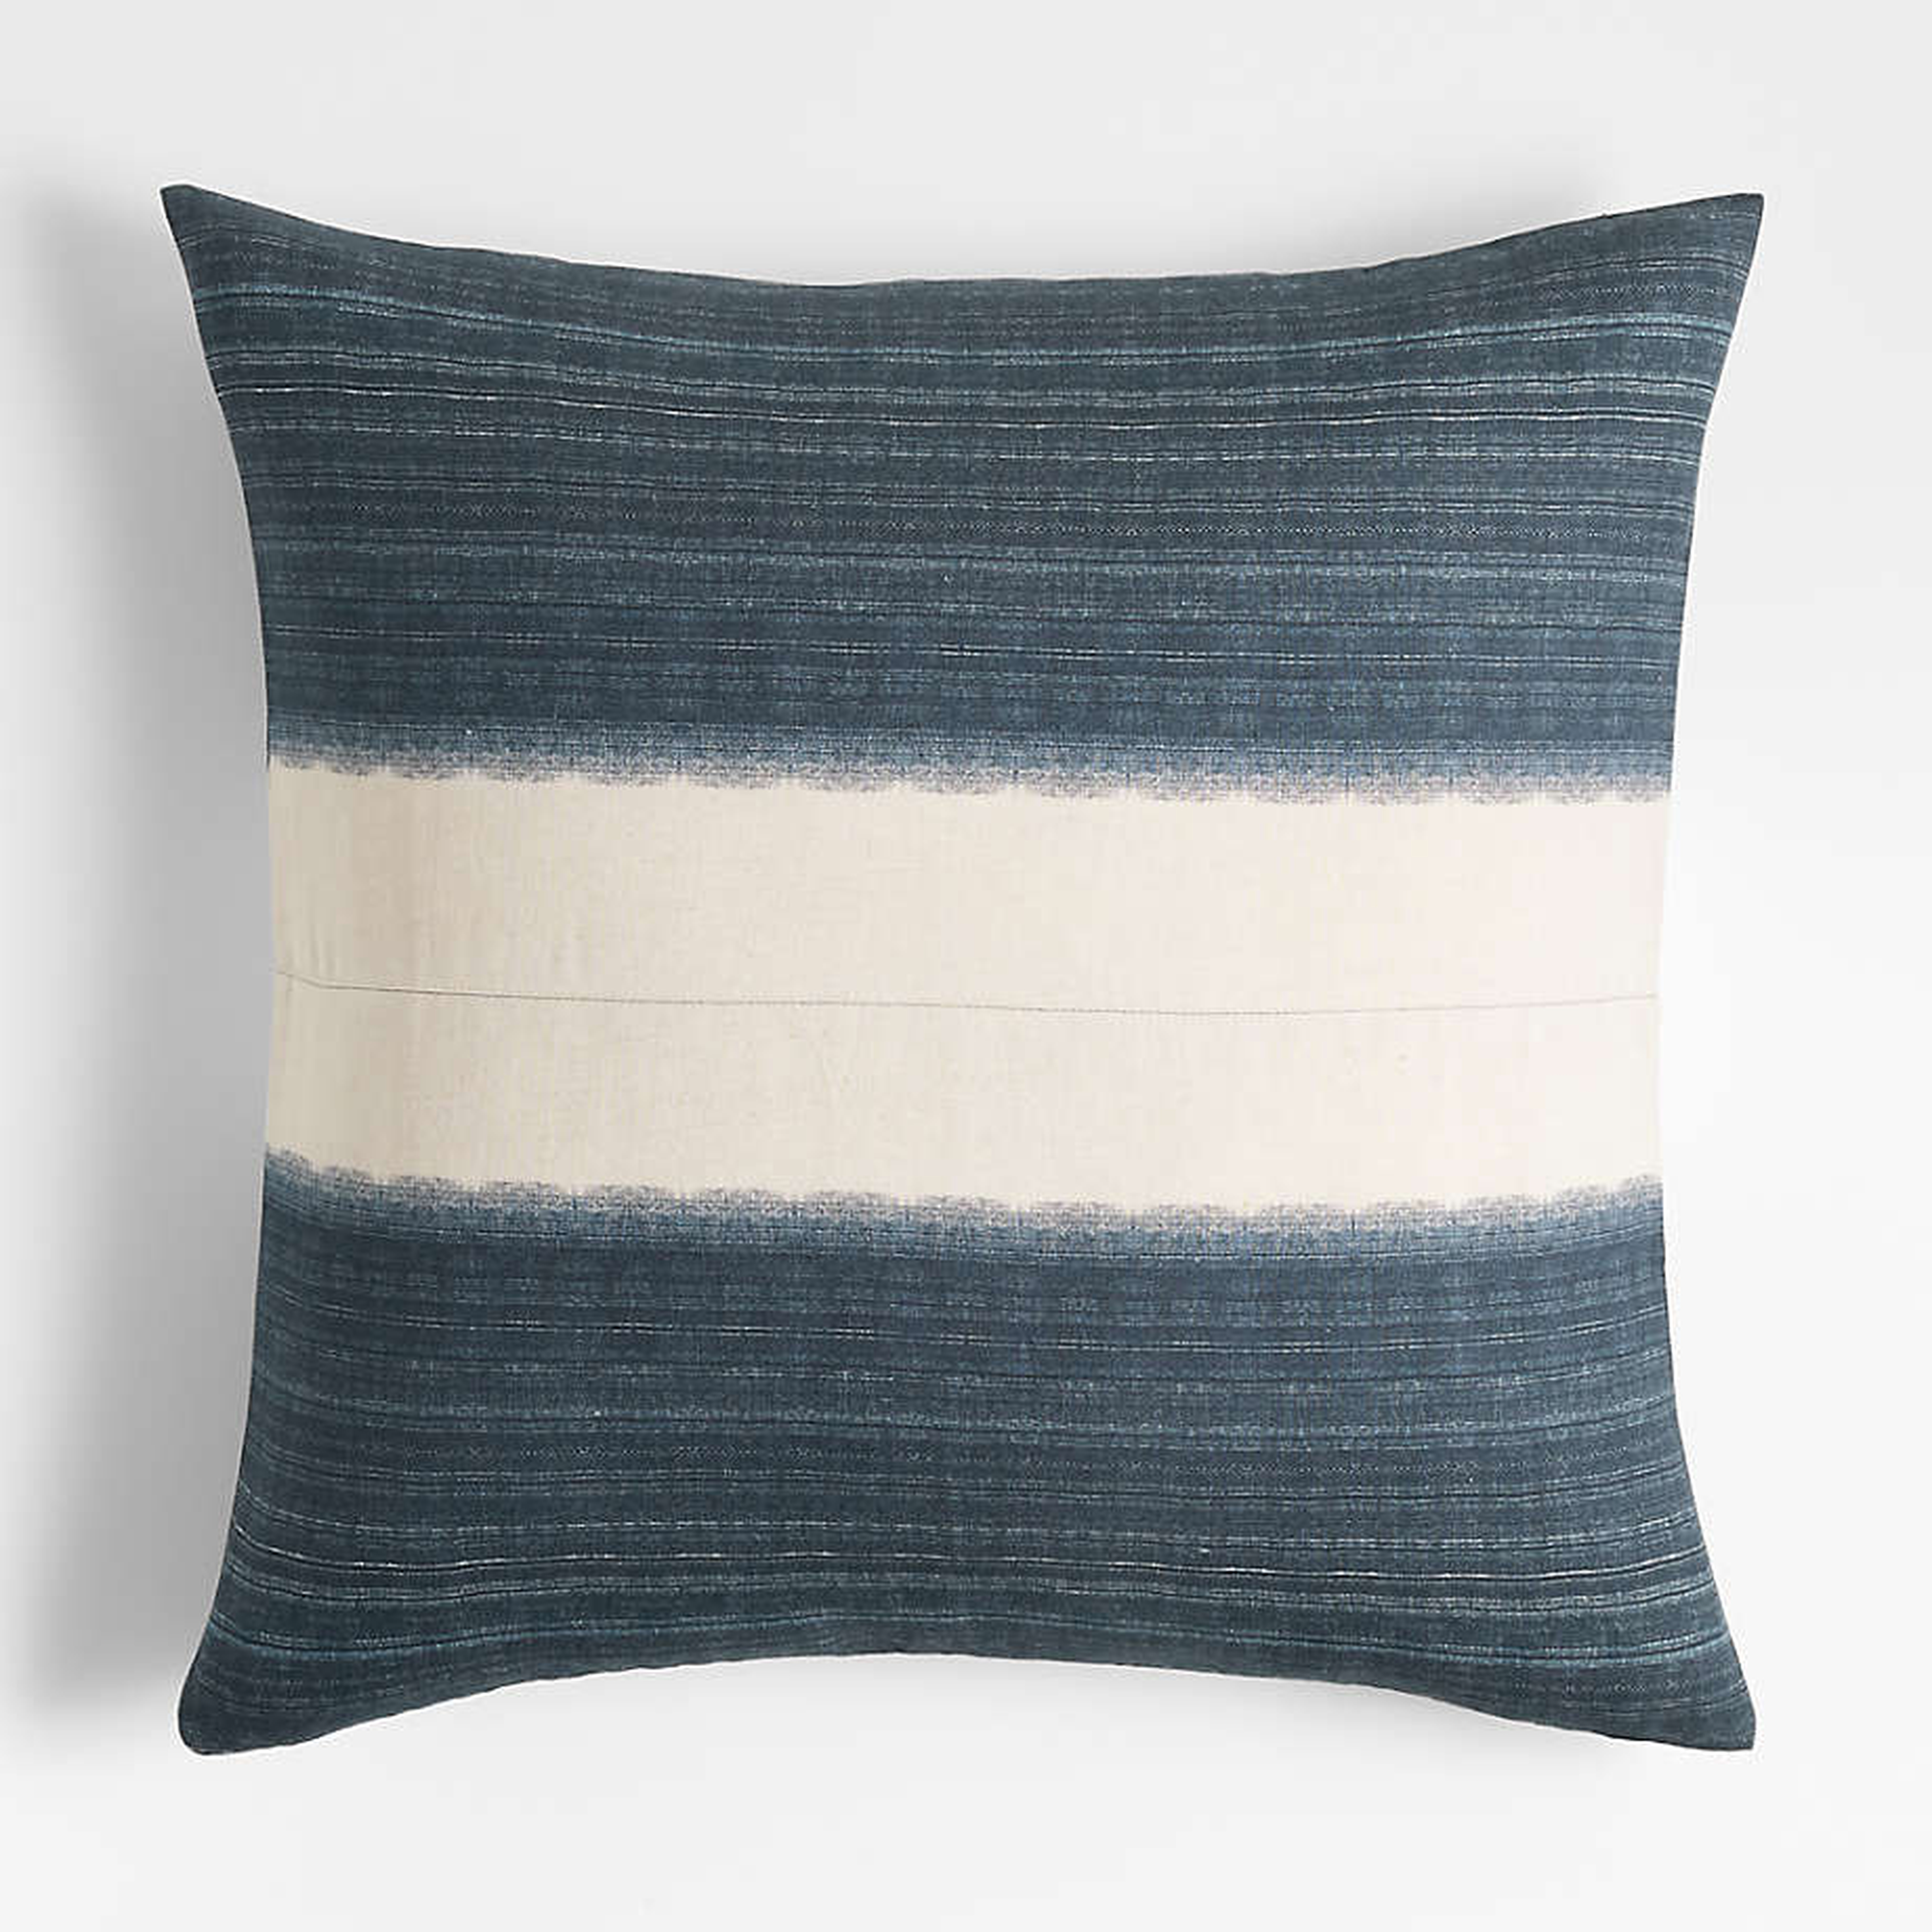 Littoral 23"x23" Two-Tone Navy Throw Pillow Cover - Crate and Barrel